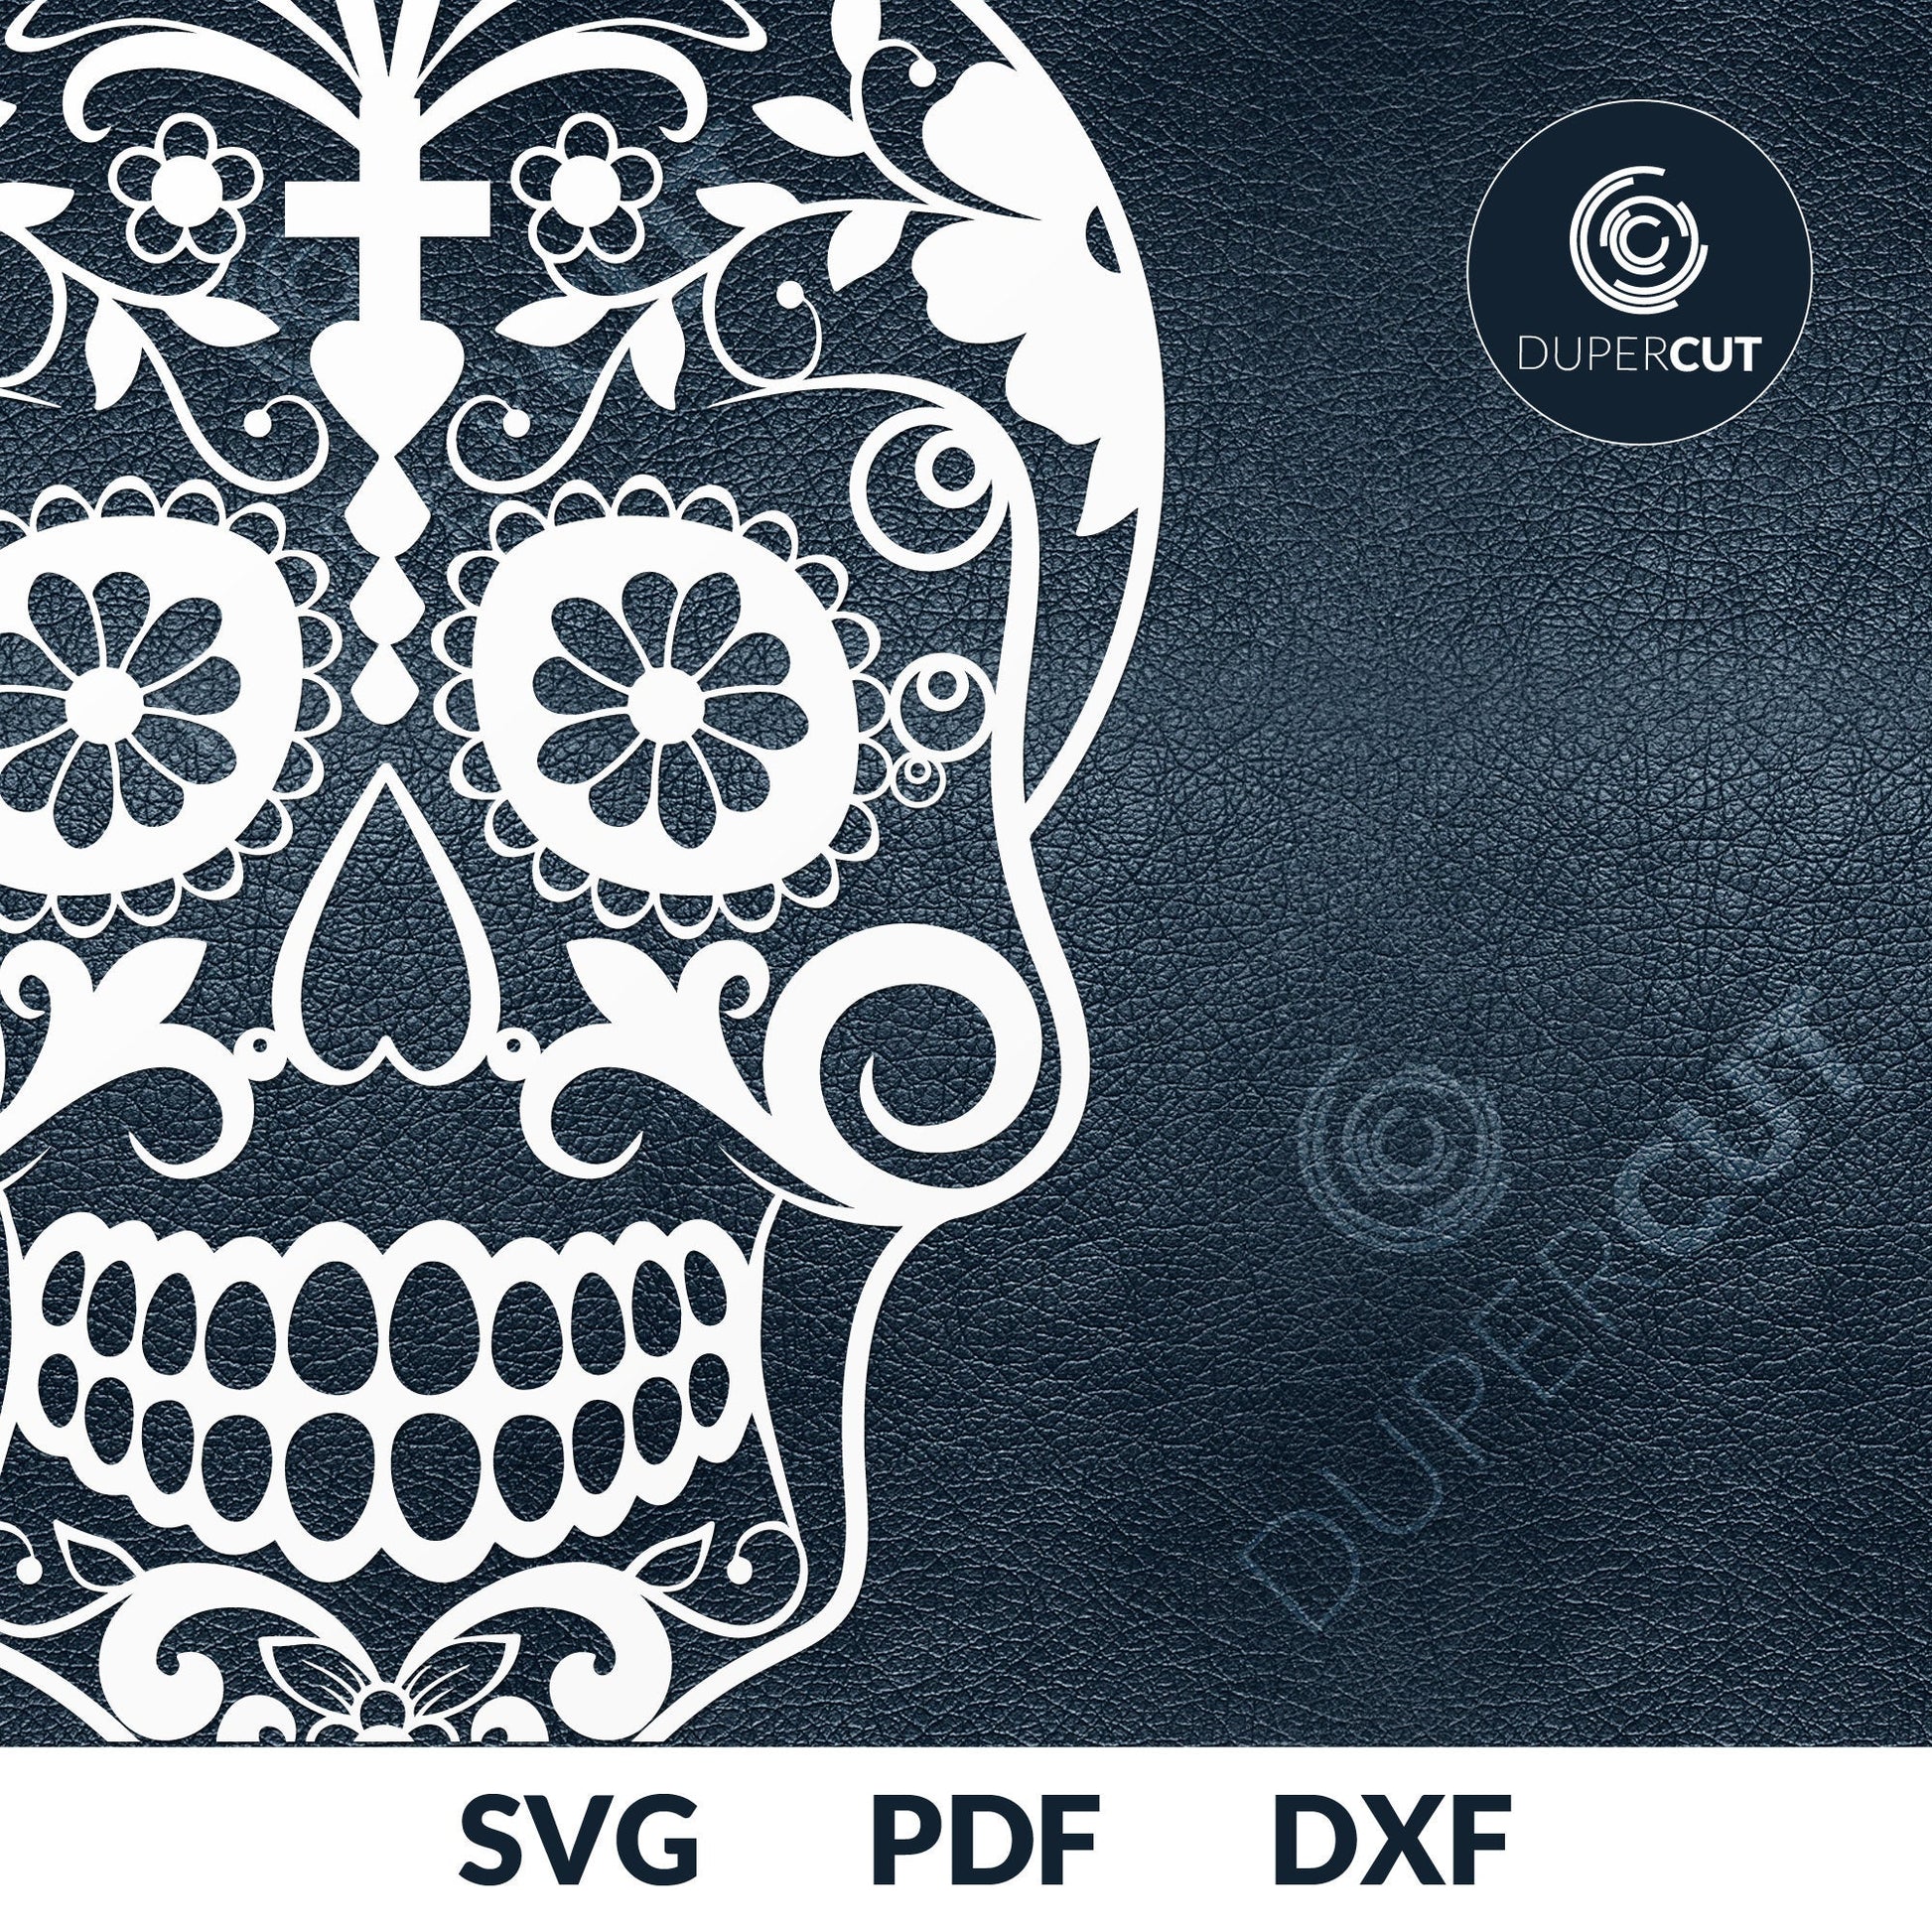 Day of the dead sugar skull, printable cutting  template - SVG DXF PNG files for Cricut, Glowforge, Silhouette Cameo, CNC Machines